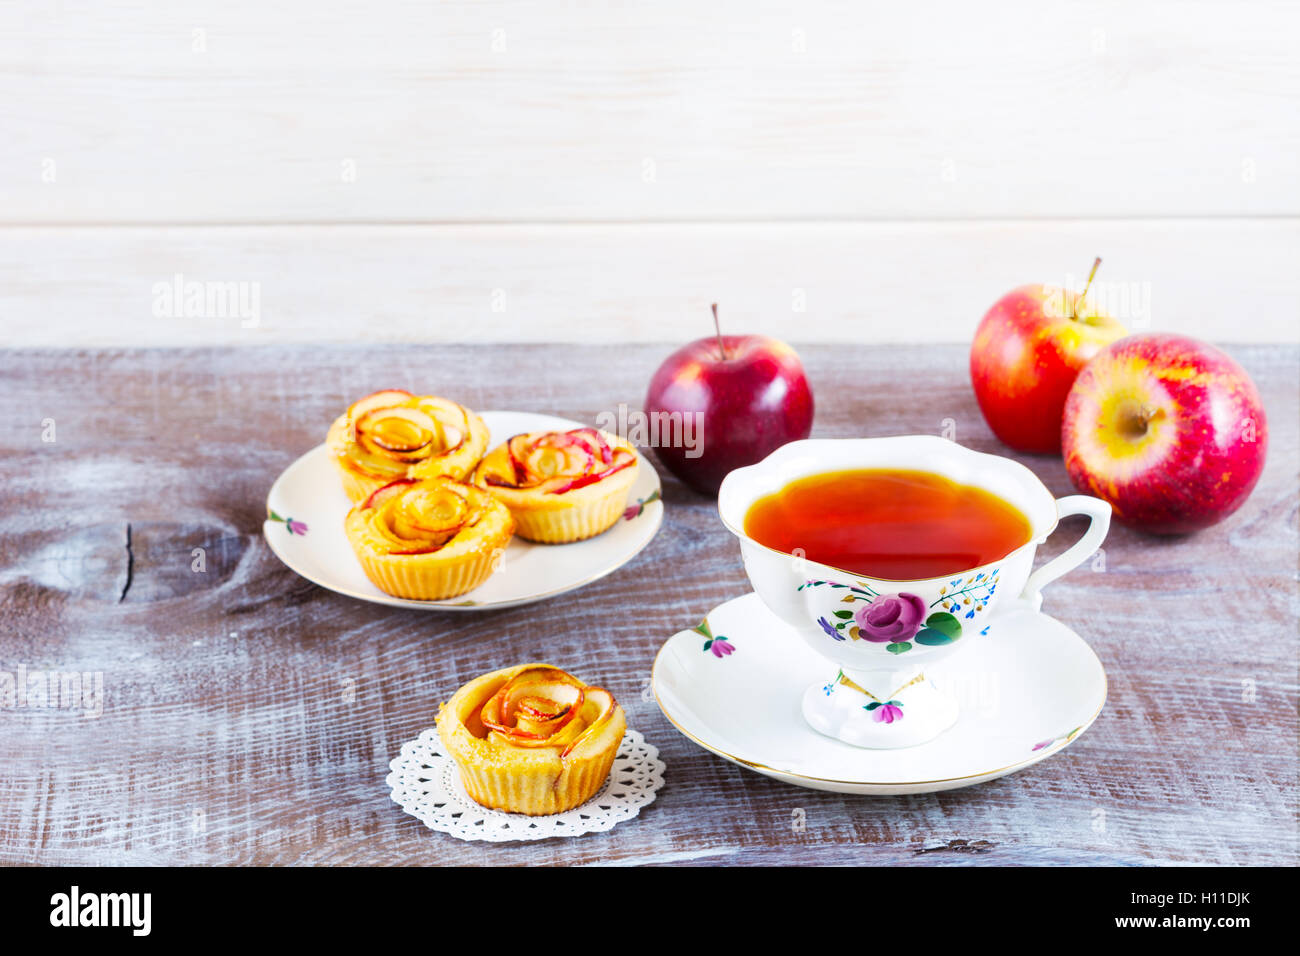 Cup of tea and apple roses shaped muffins on rustic wooden table. Sweet apple dessert pie. Homemade apple rose pastry. Breakfast Stock Photo